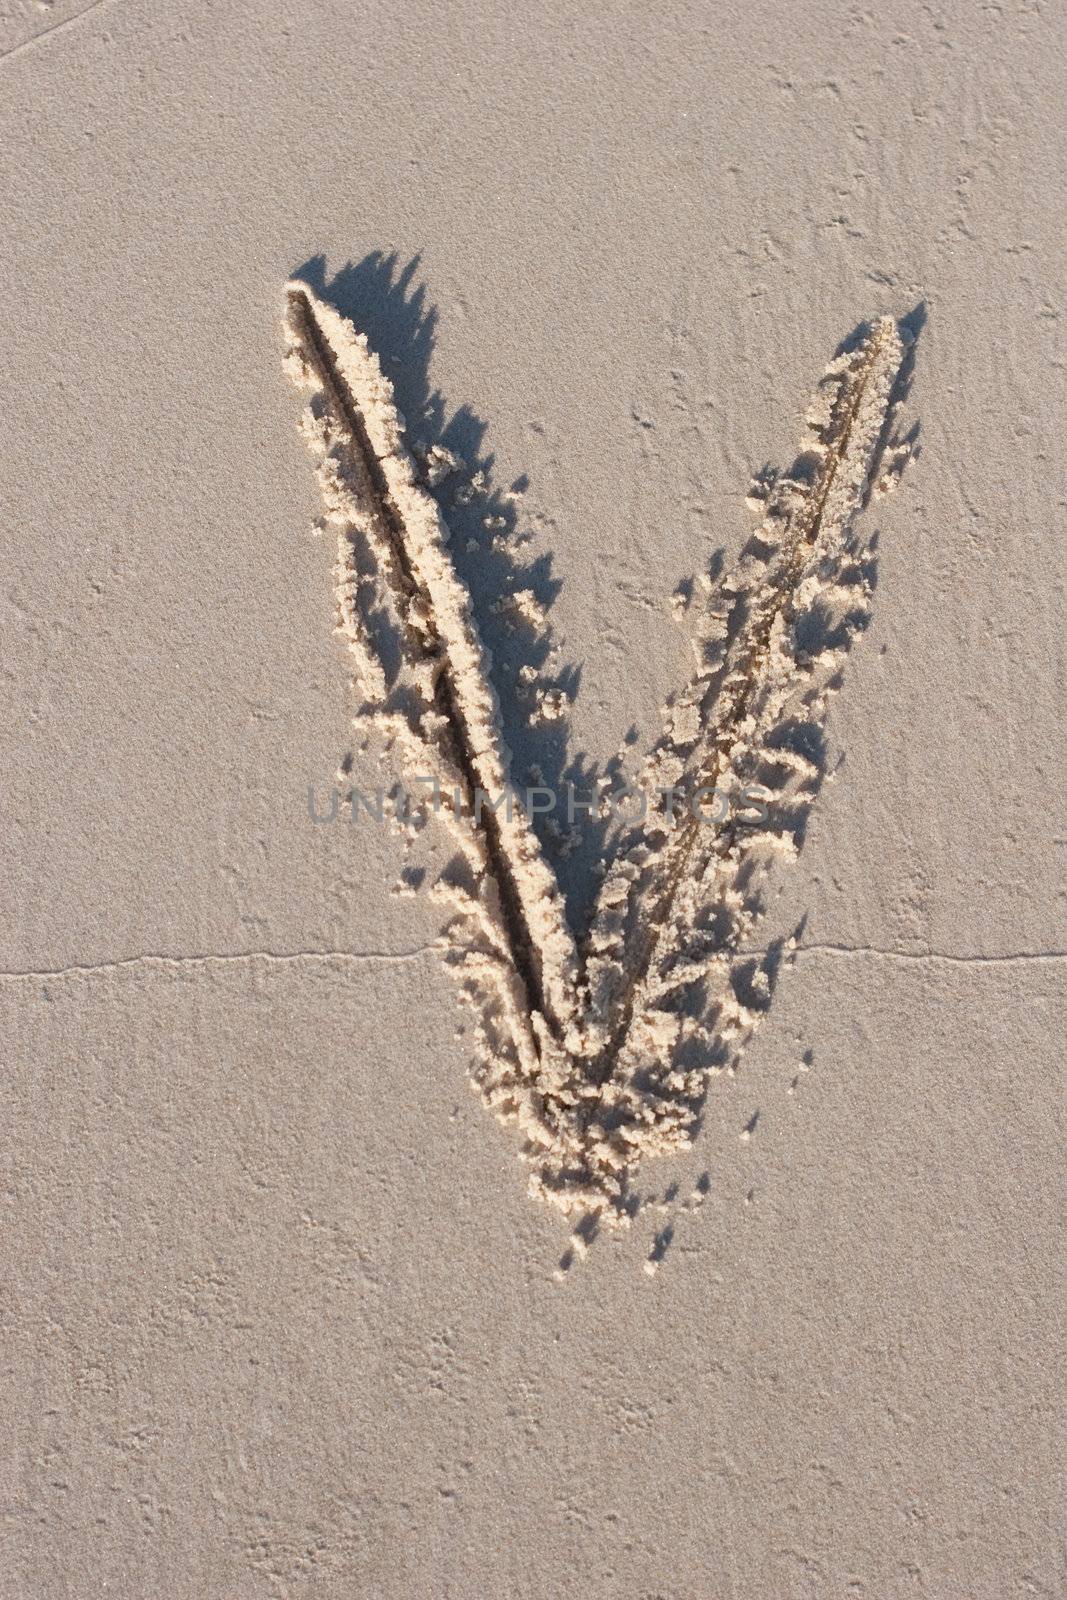 Letter V drawn in the sand. 